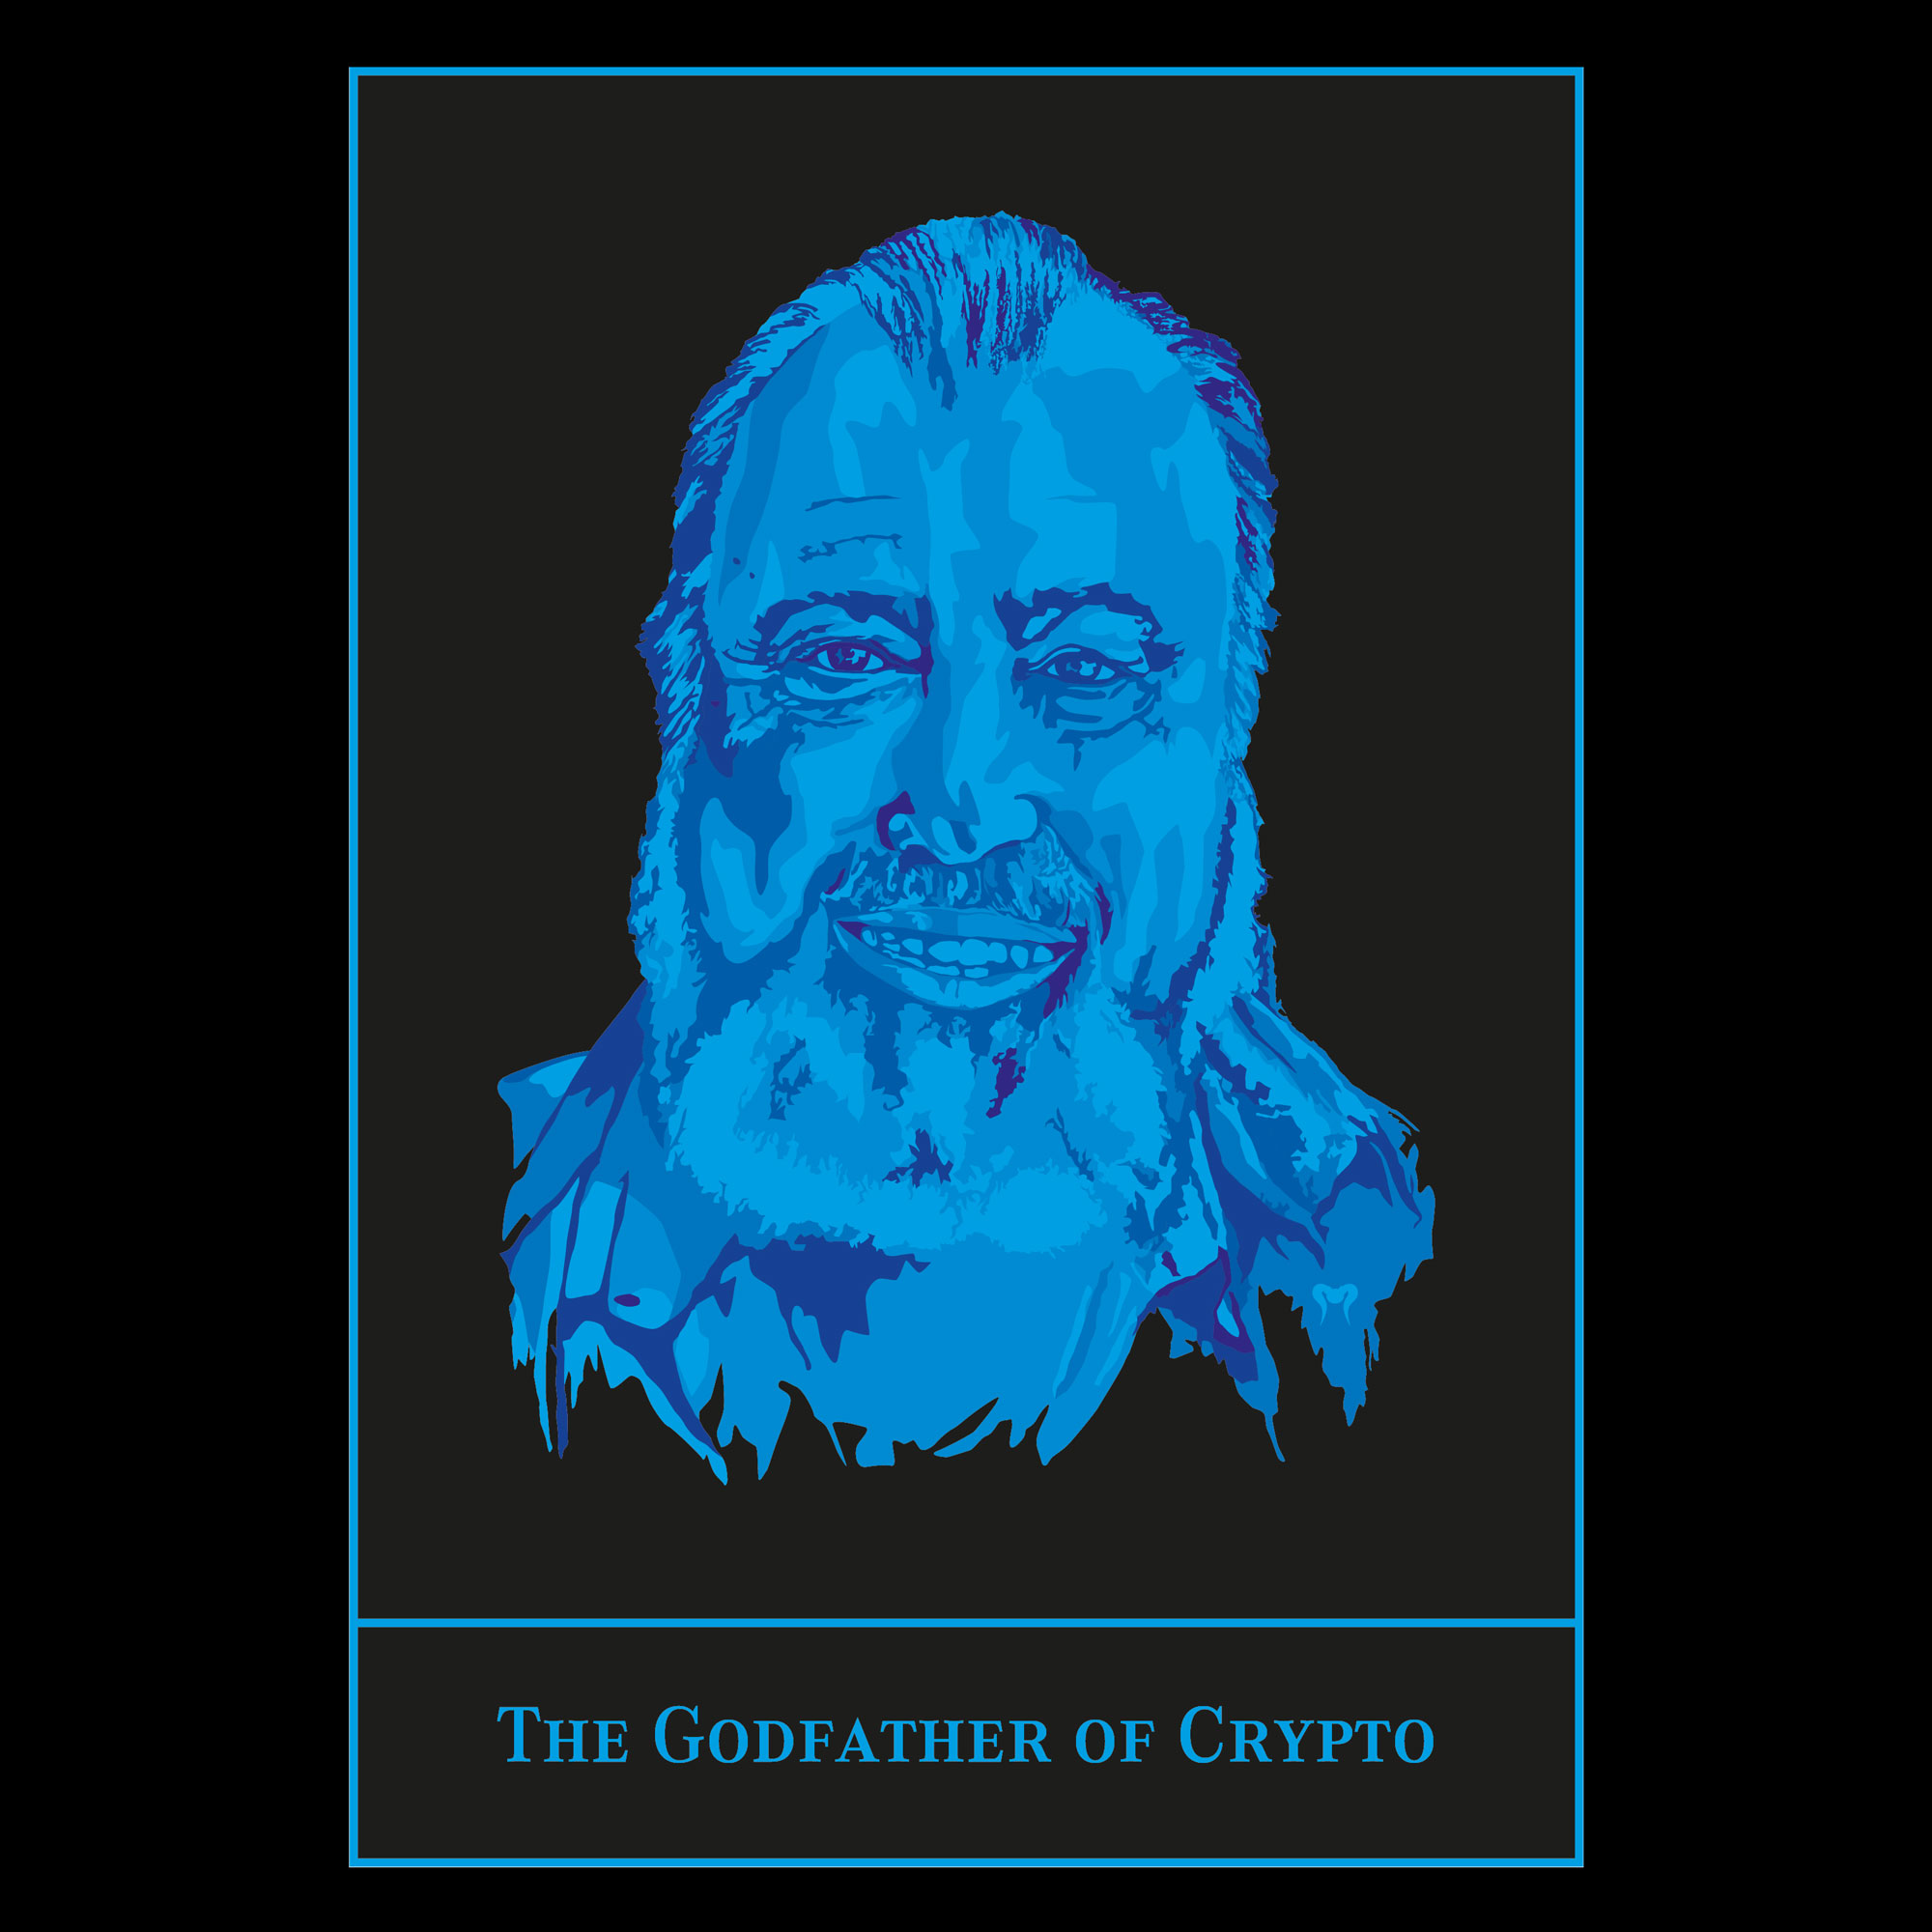 The Godfather of Crypto